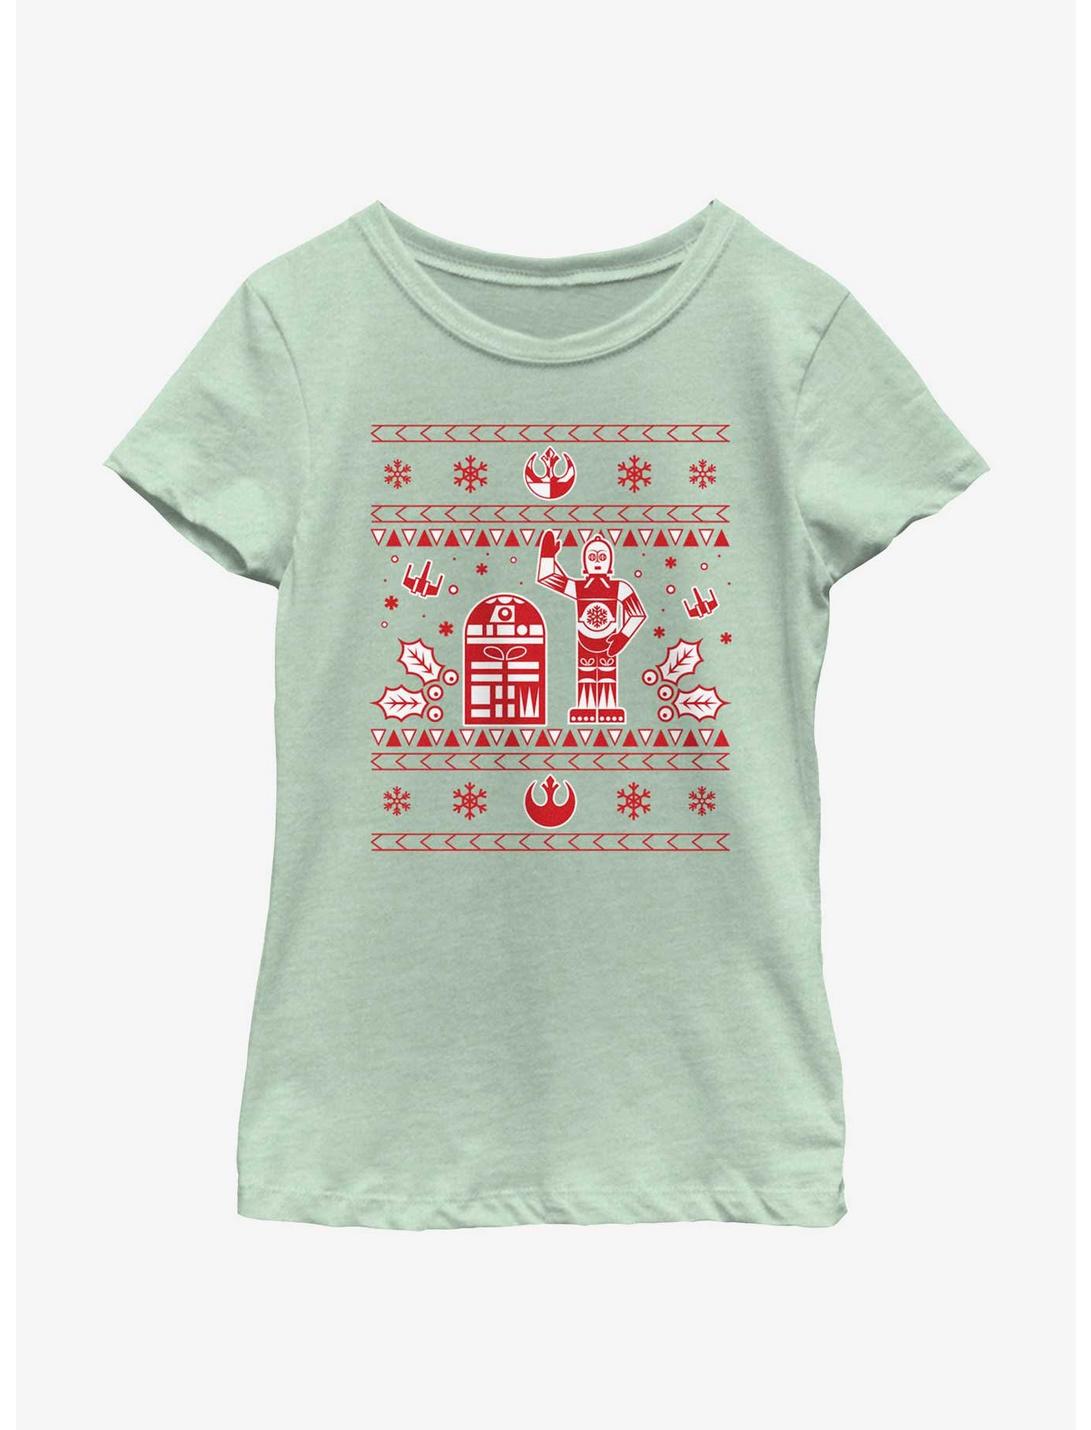 Star Wars Droid Ugly Christmas Pattern Youth Girls T-Shirt, MINT, hi-res